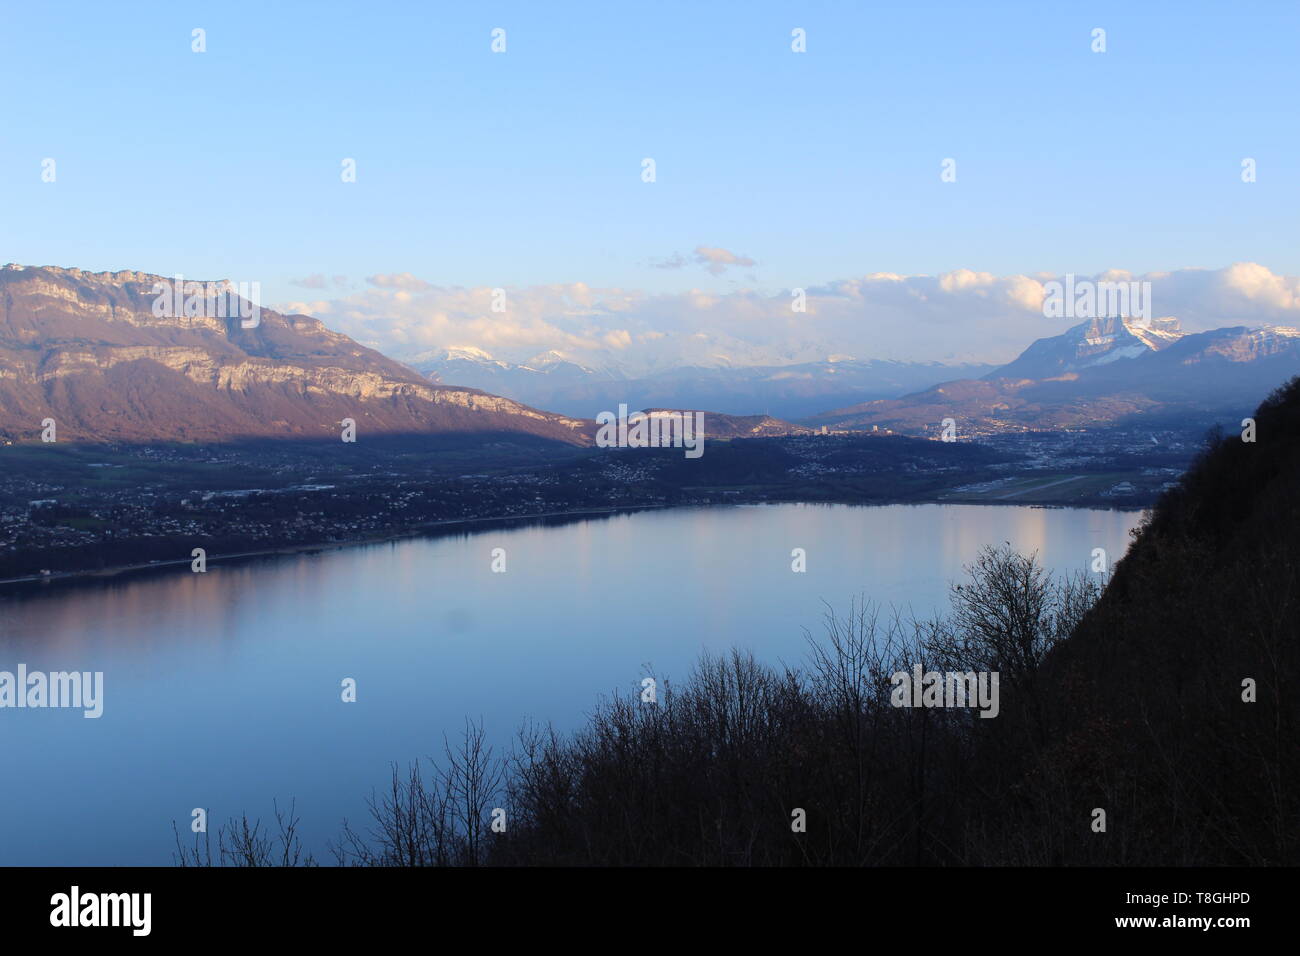 Lake in the French Alpes, Aix les bains Stock Photo